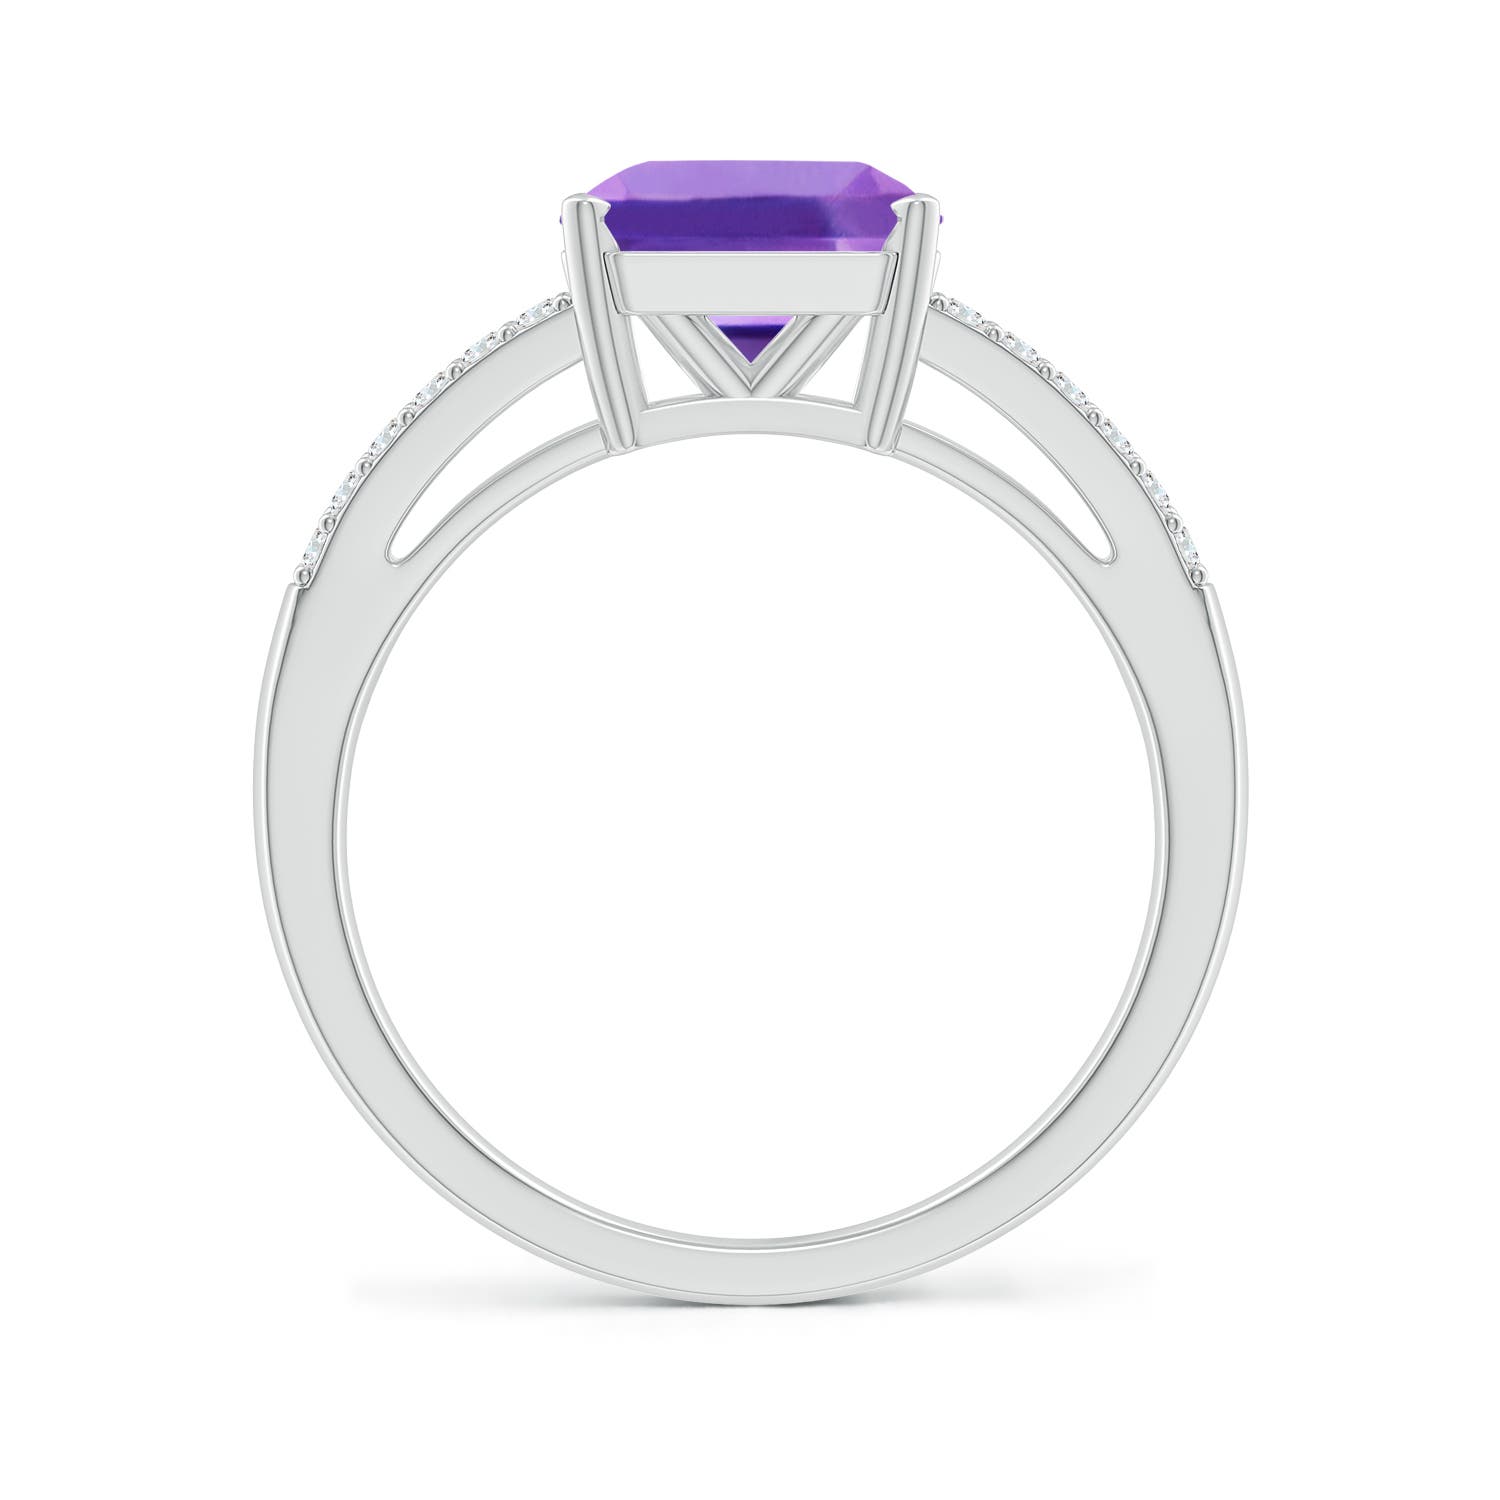 AA - Amethyst / 2.24 CT / 14 KT White Gold